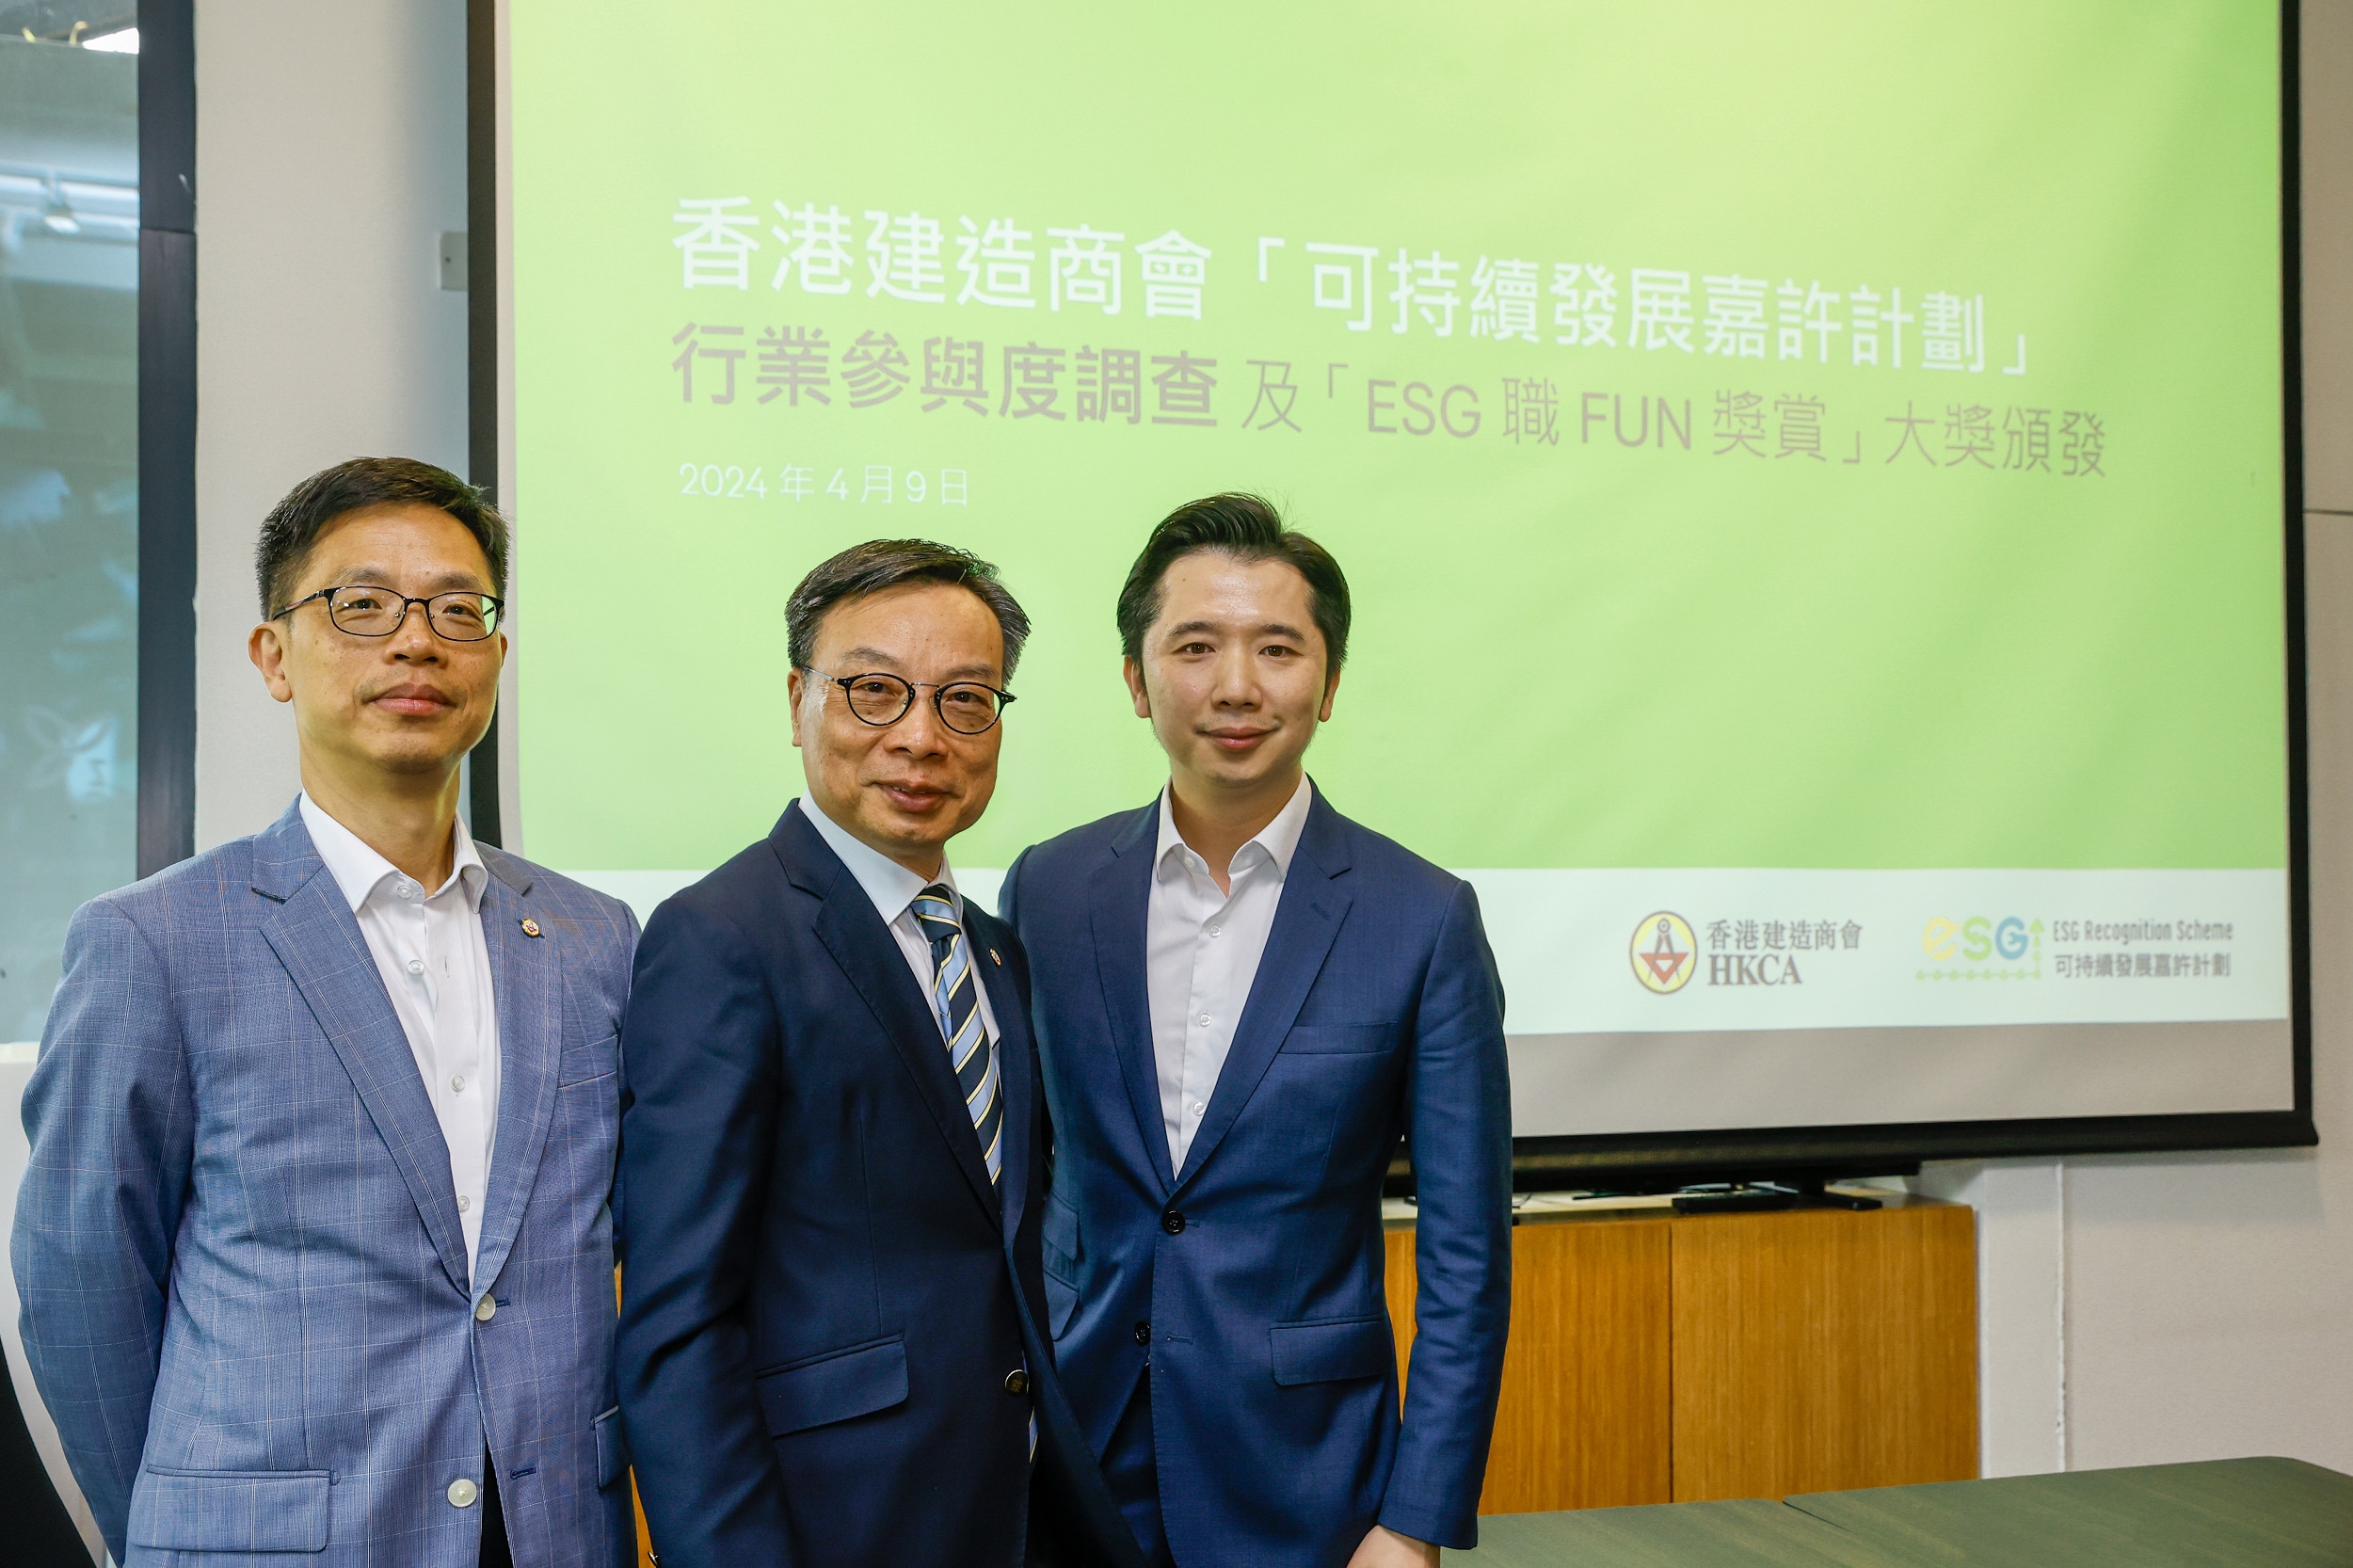 Mr. Eddie Lam, MH, President of HKCA (middle), Mr. Rex Wong, JP, First Vice President of HKCA (right) and Mr. Godfrey Leung, SBS, Executive Director of HKCA announced the survey findings of HKCA’s ESG Recognition Scheme.